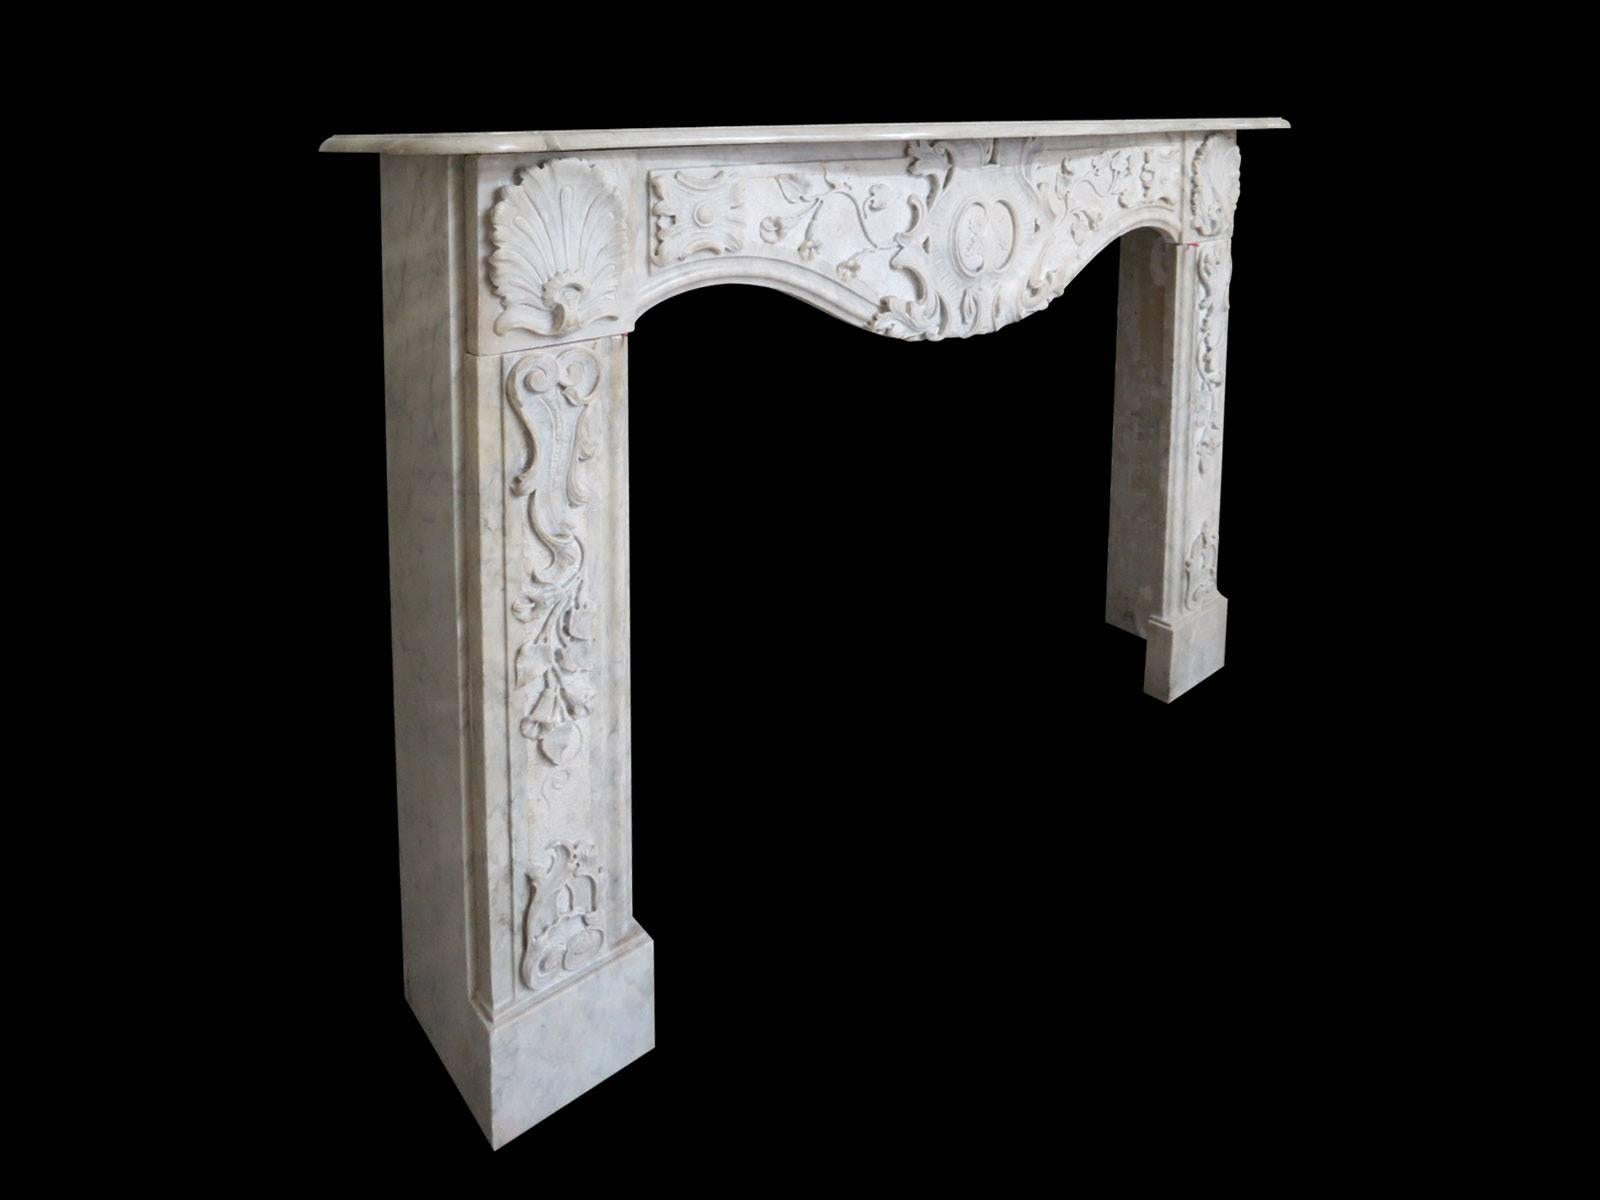 A very late 18th century Italian fireplace in Carrara marble, the deep serpentine shelf with profusely carved frieze below with large central cartouche, tendrils, vines and flowers. The end blocks of shells with descending foliage conforming with